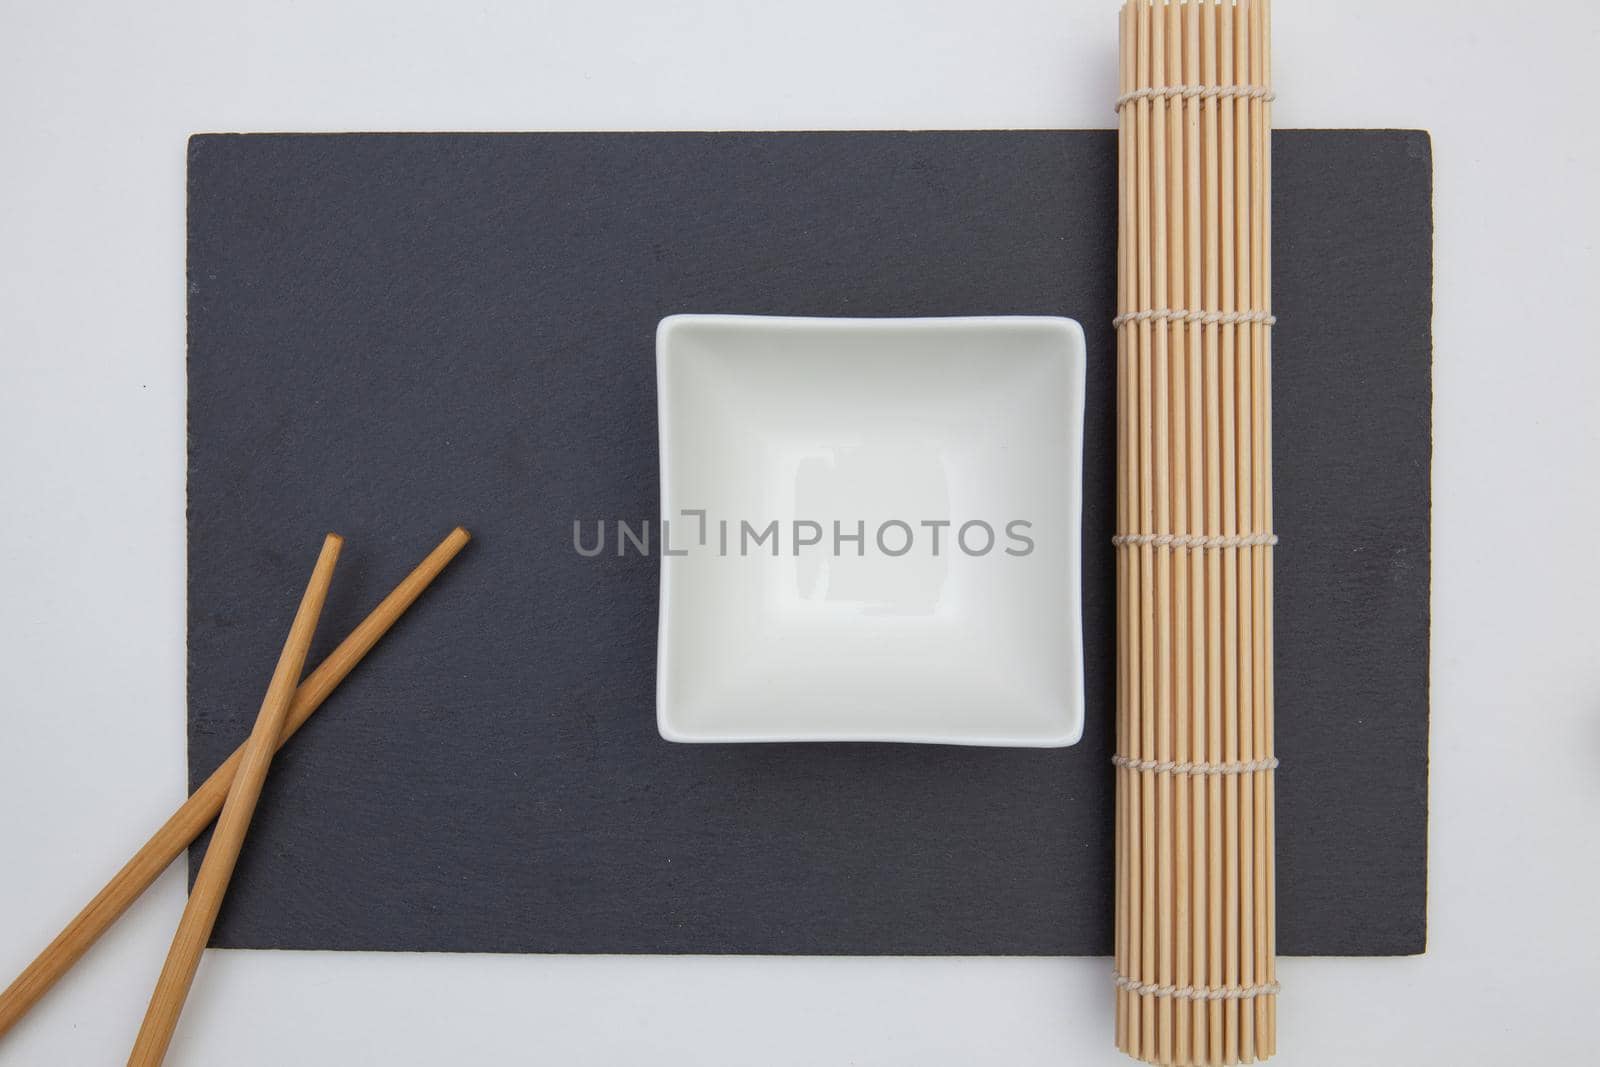 Rectangular slate plate with chopsticks, ceramic plate, bamboo mat for sushi on the white table.